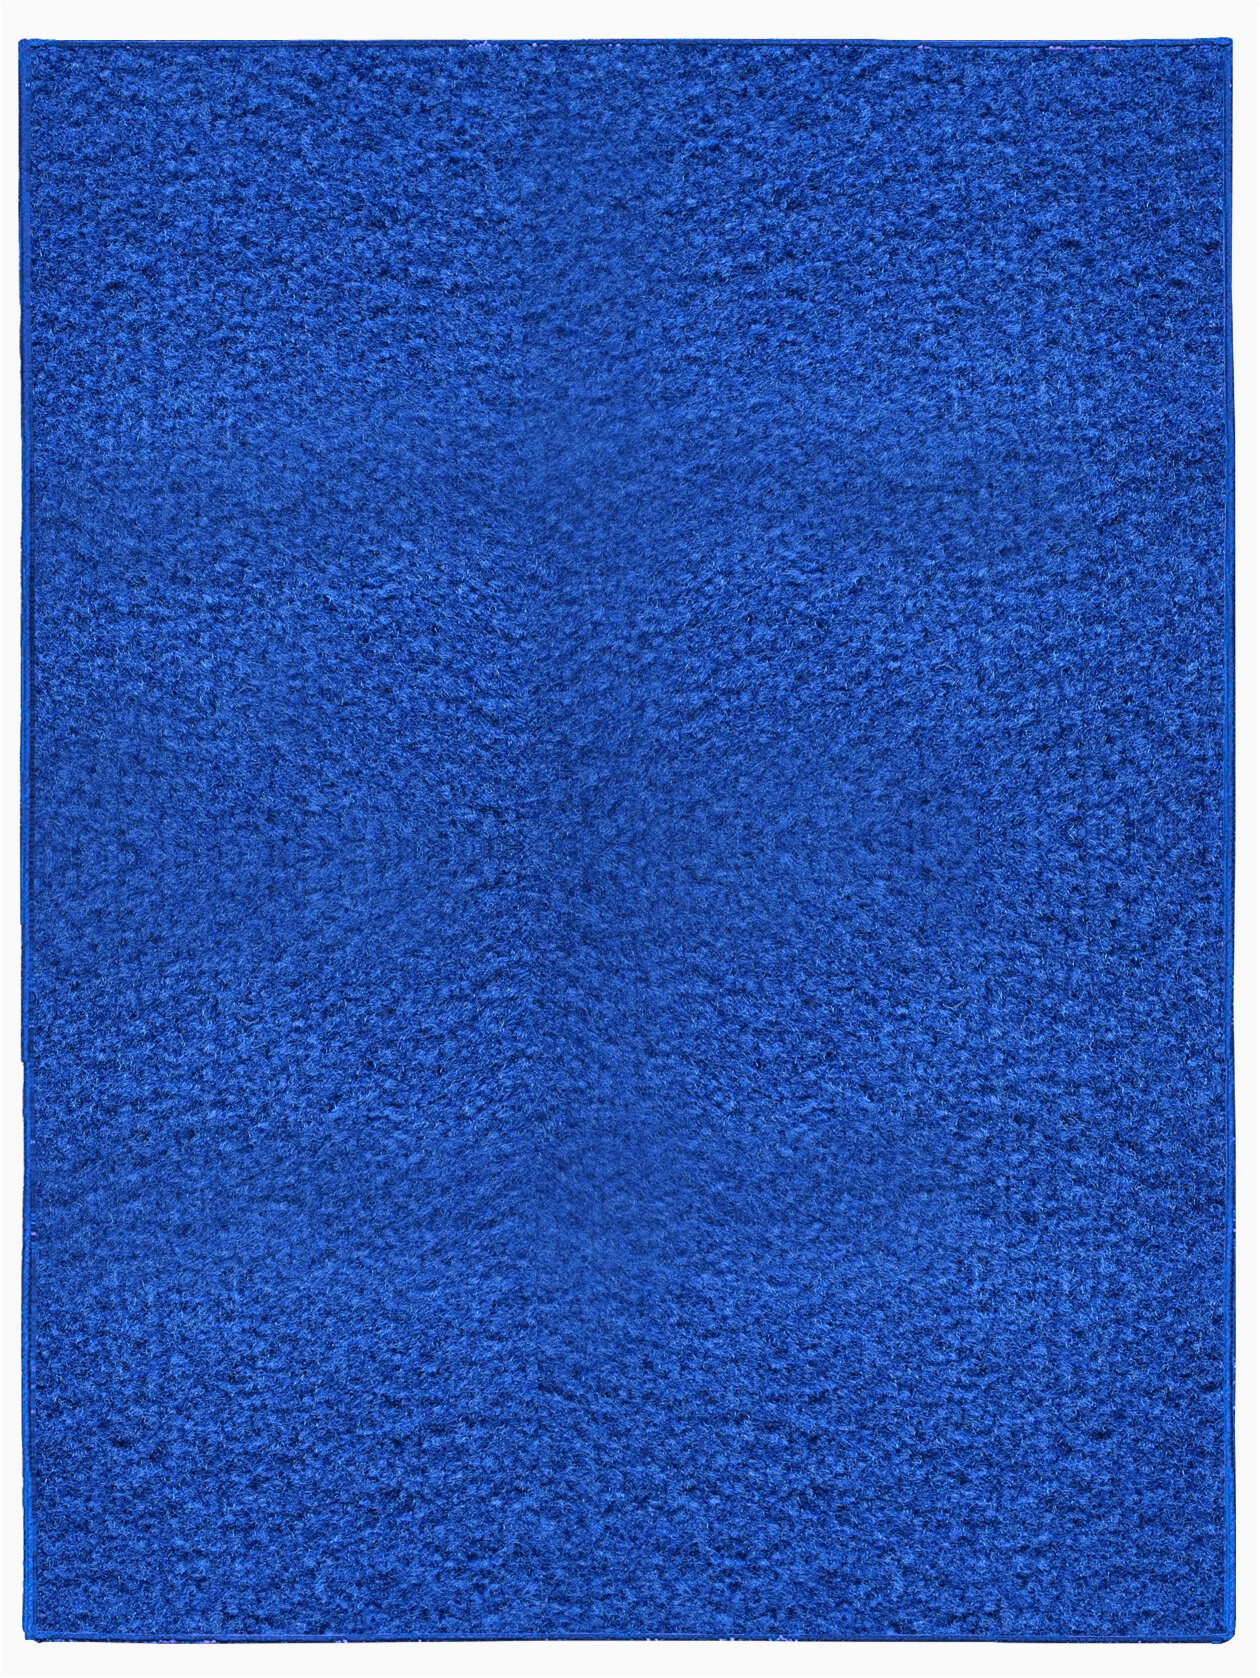 ebern designs galaxy way solid colour area rugs with rubber marine backing for patio porch deck boat basement or garage with premium bound polyester edges blue half round 36 x 72 c piid=